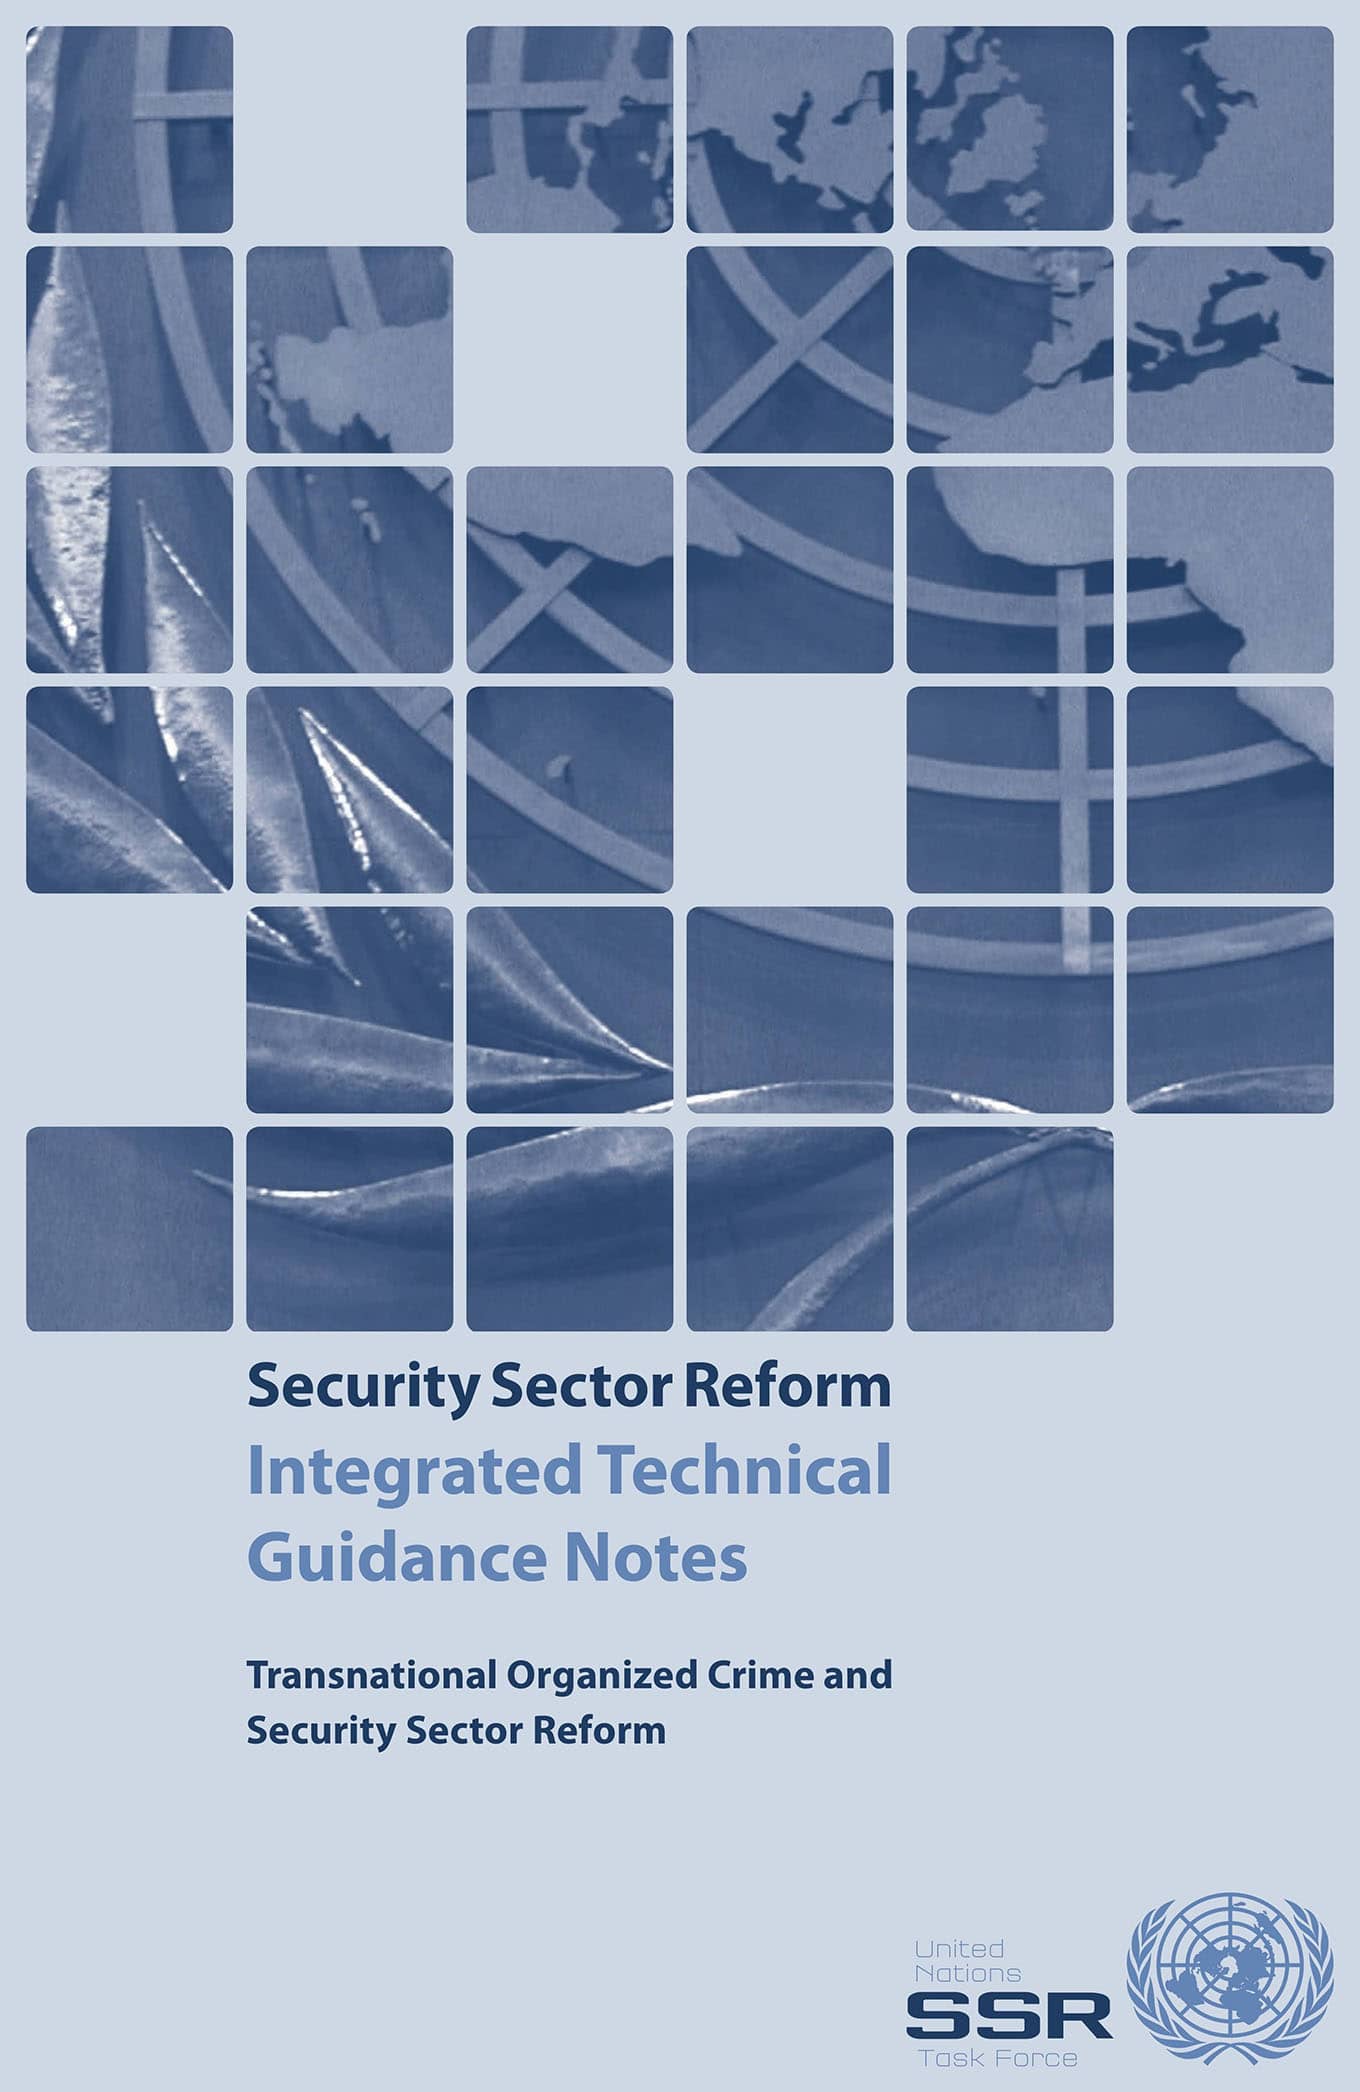 UN Security Sector Reform Intergrated Technical Guidance Notes (ITGN's, 2016)